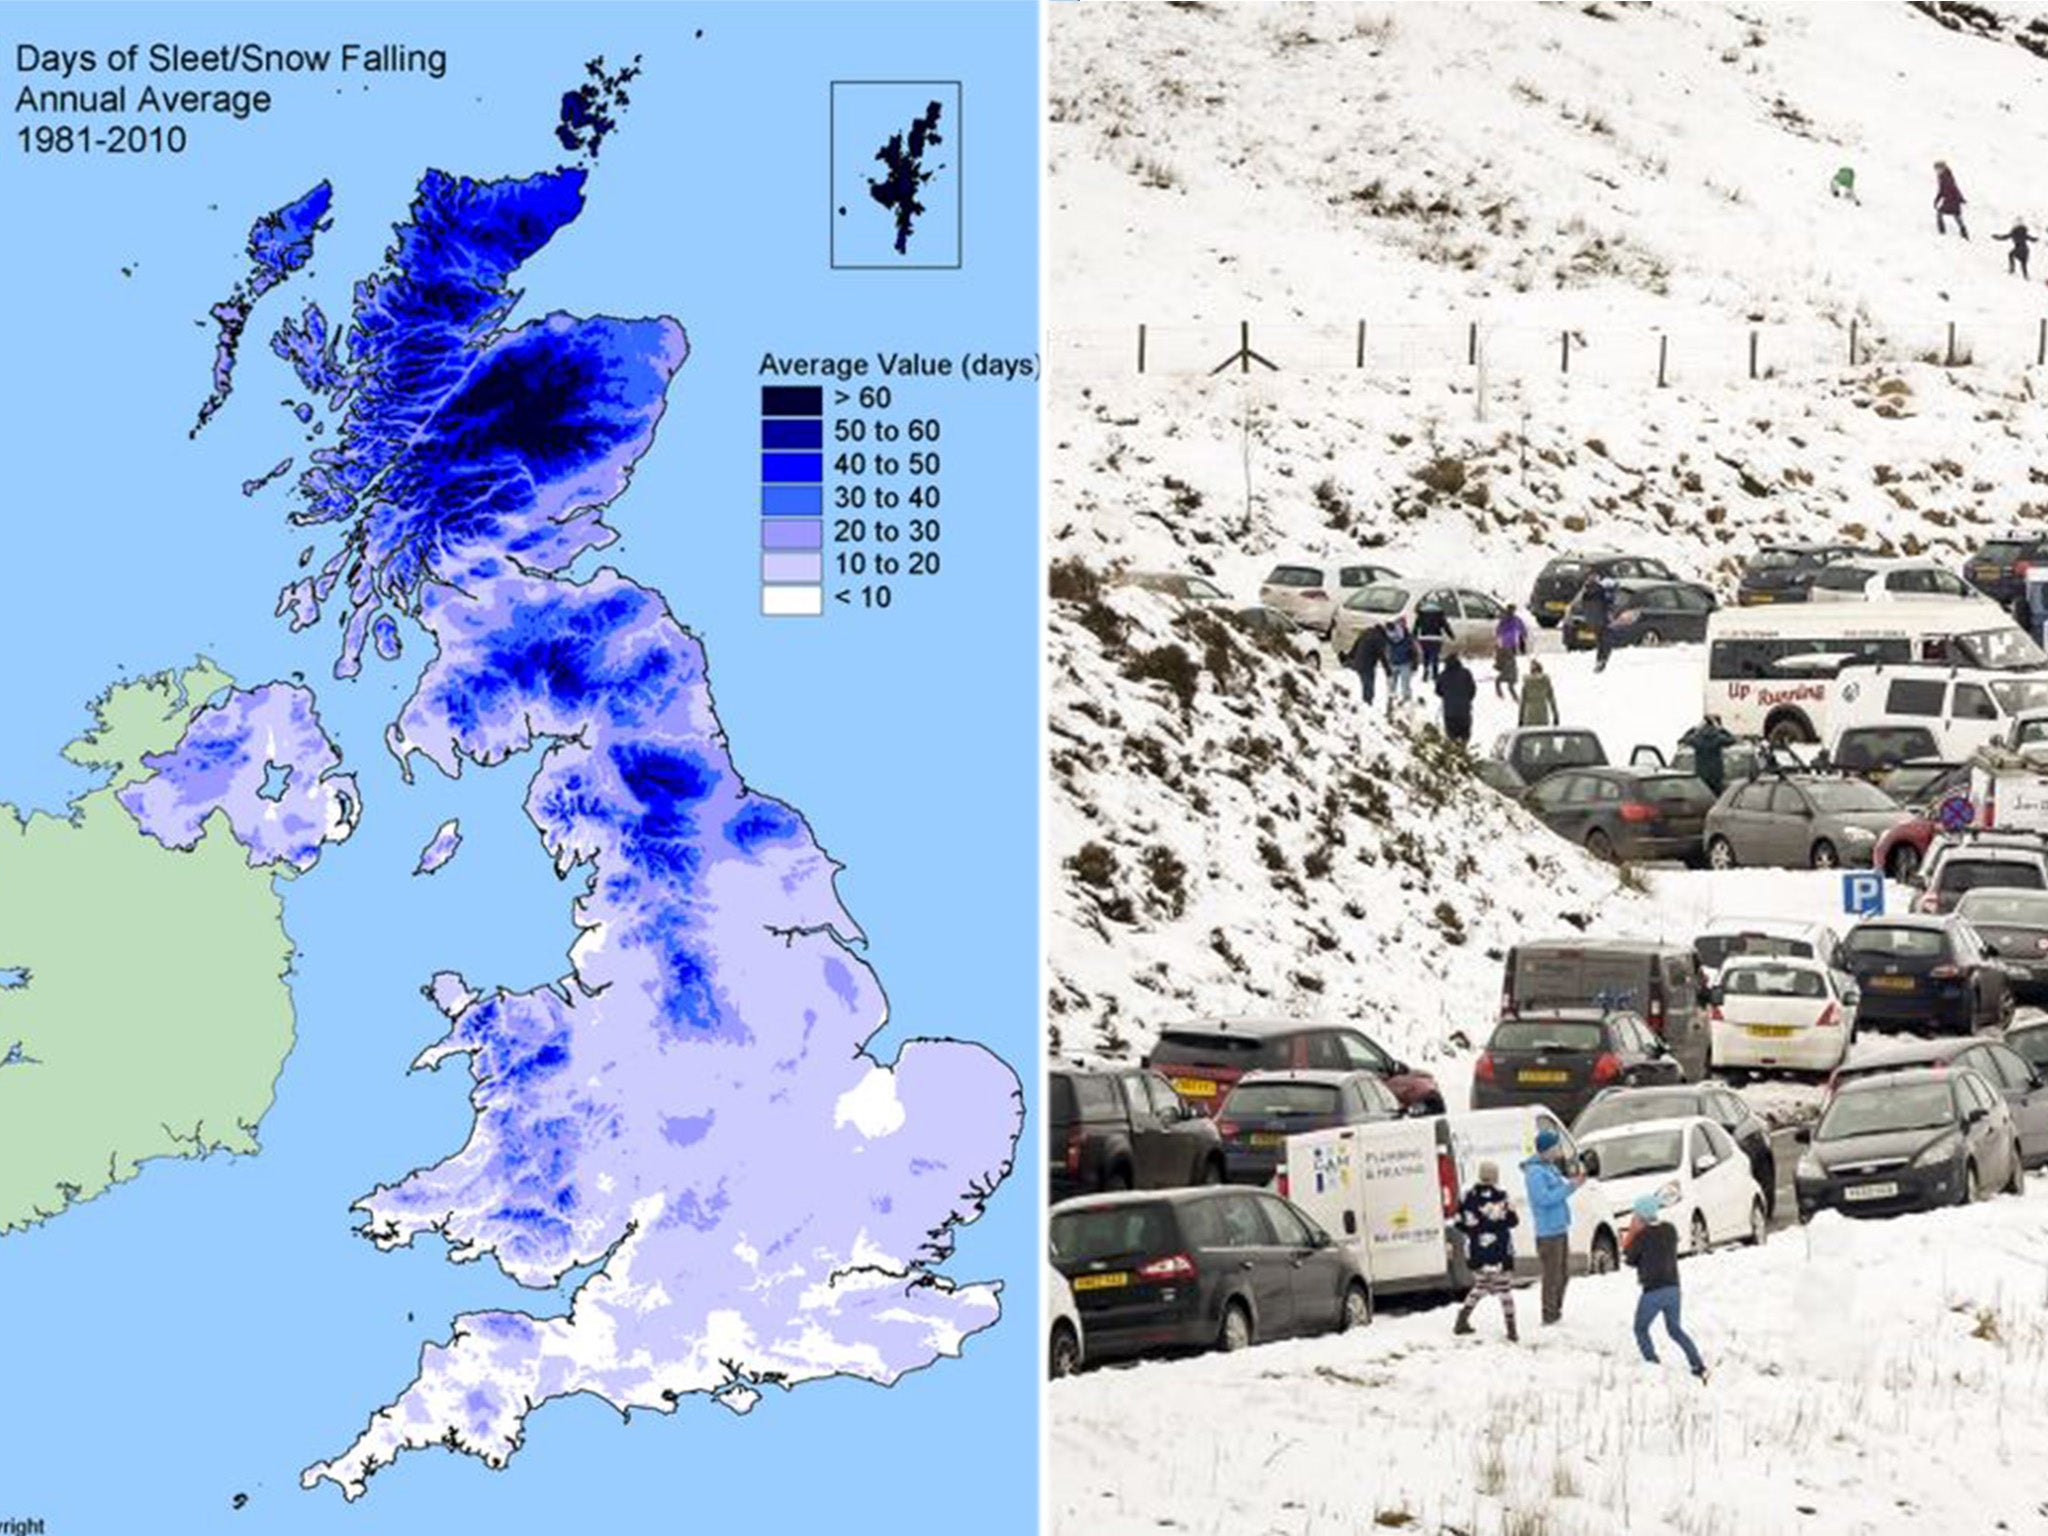 Up to 10cm of snow is expected to fall in a '100 mile corridor' across the UK